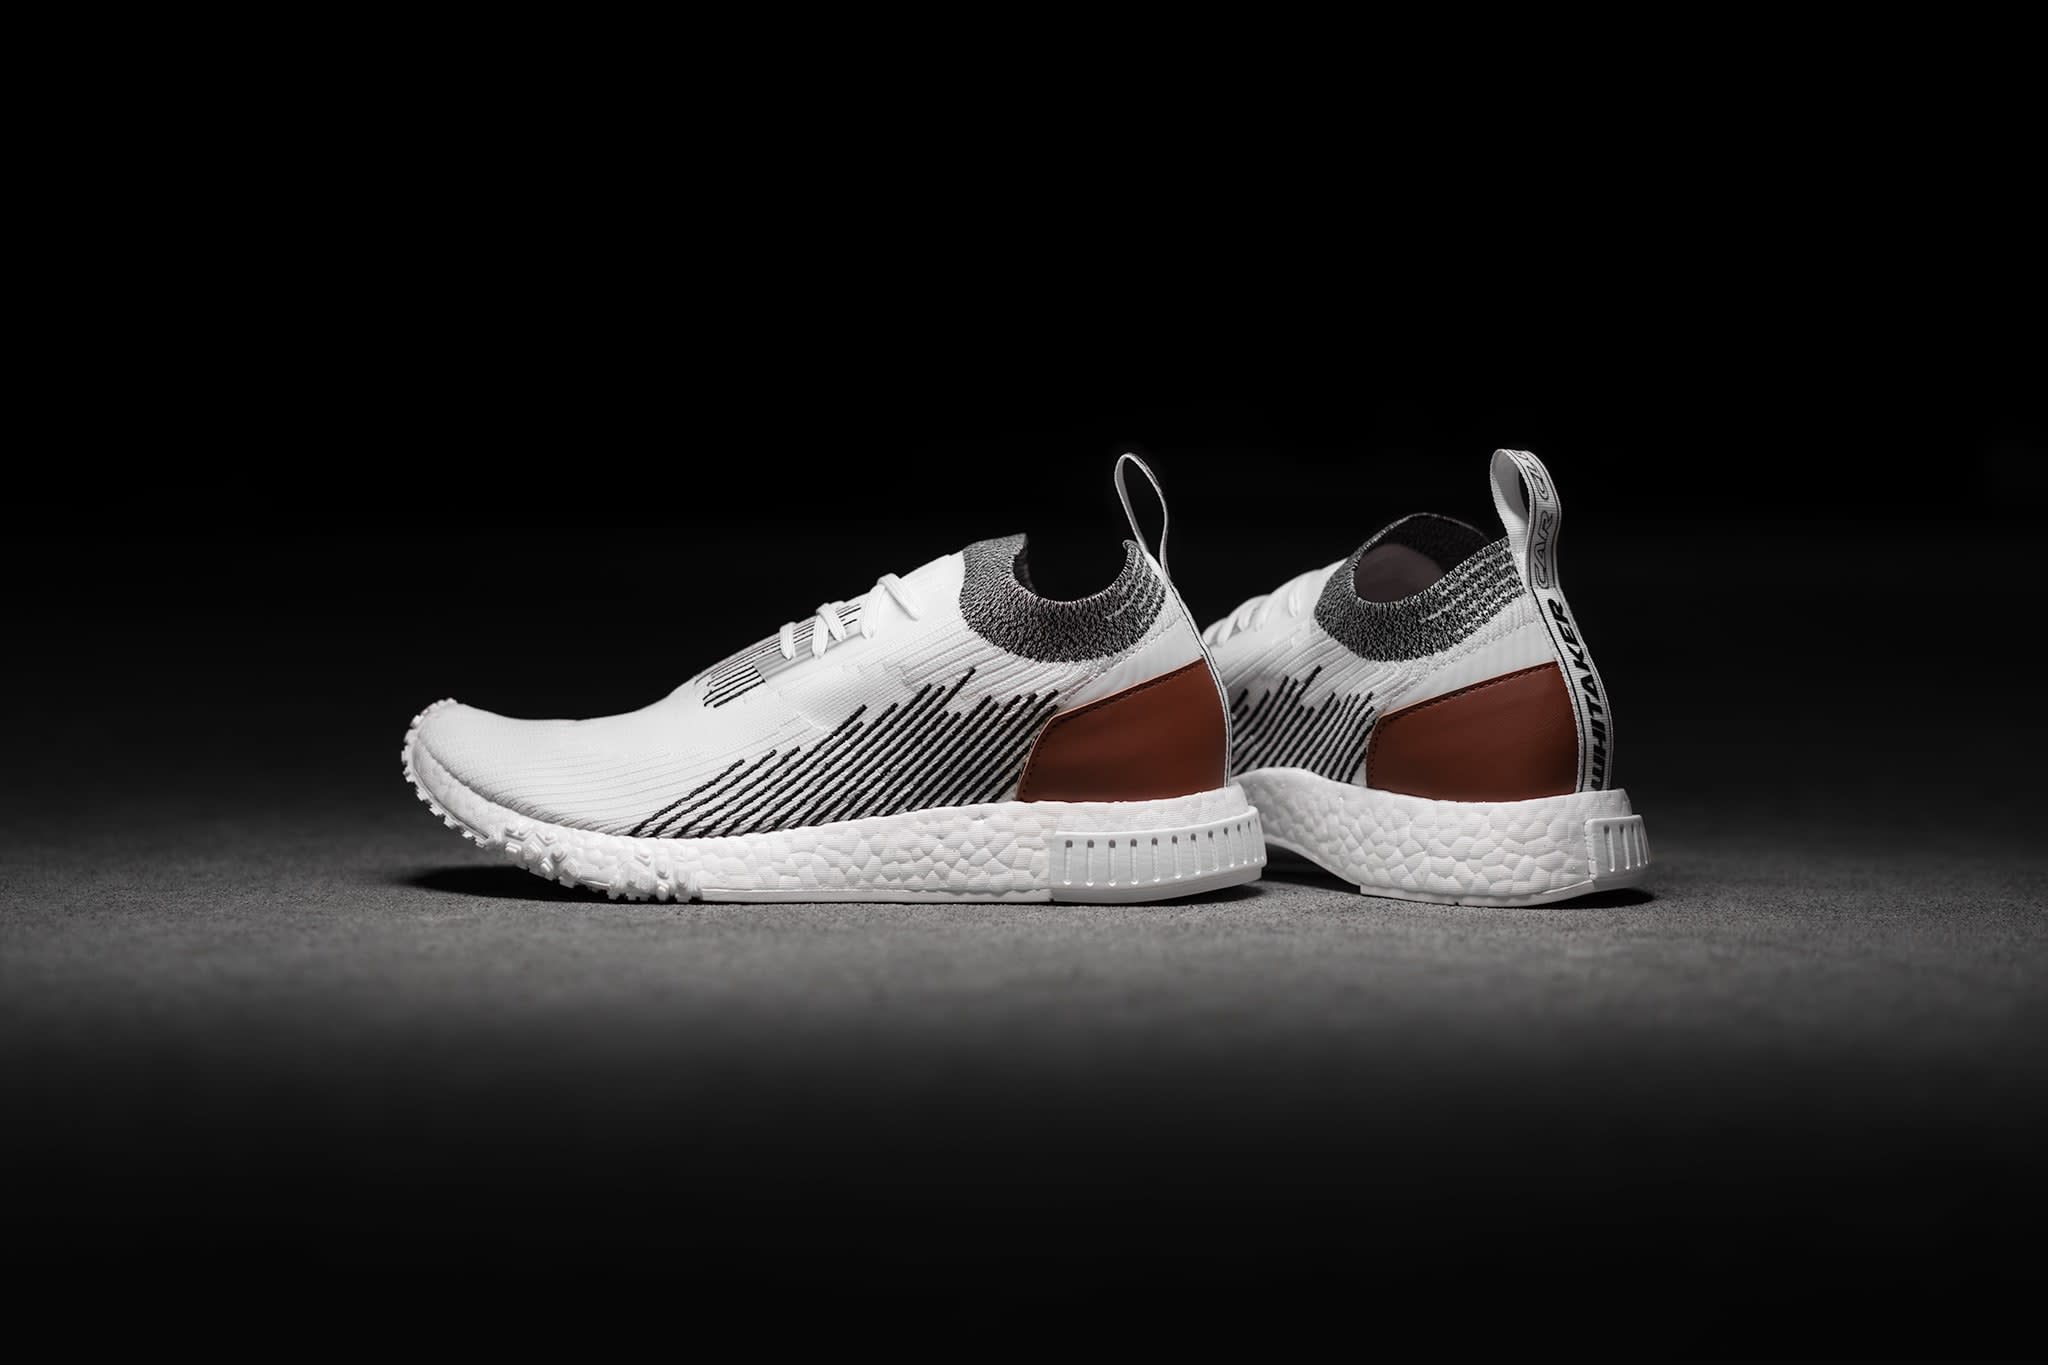 adidas haven racer